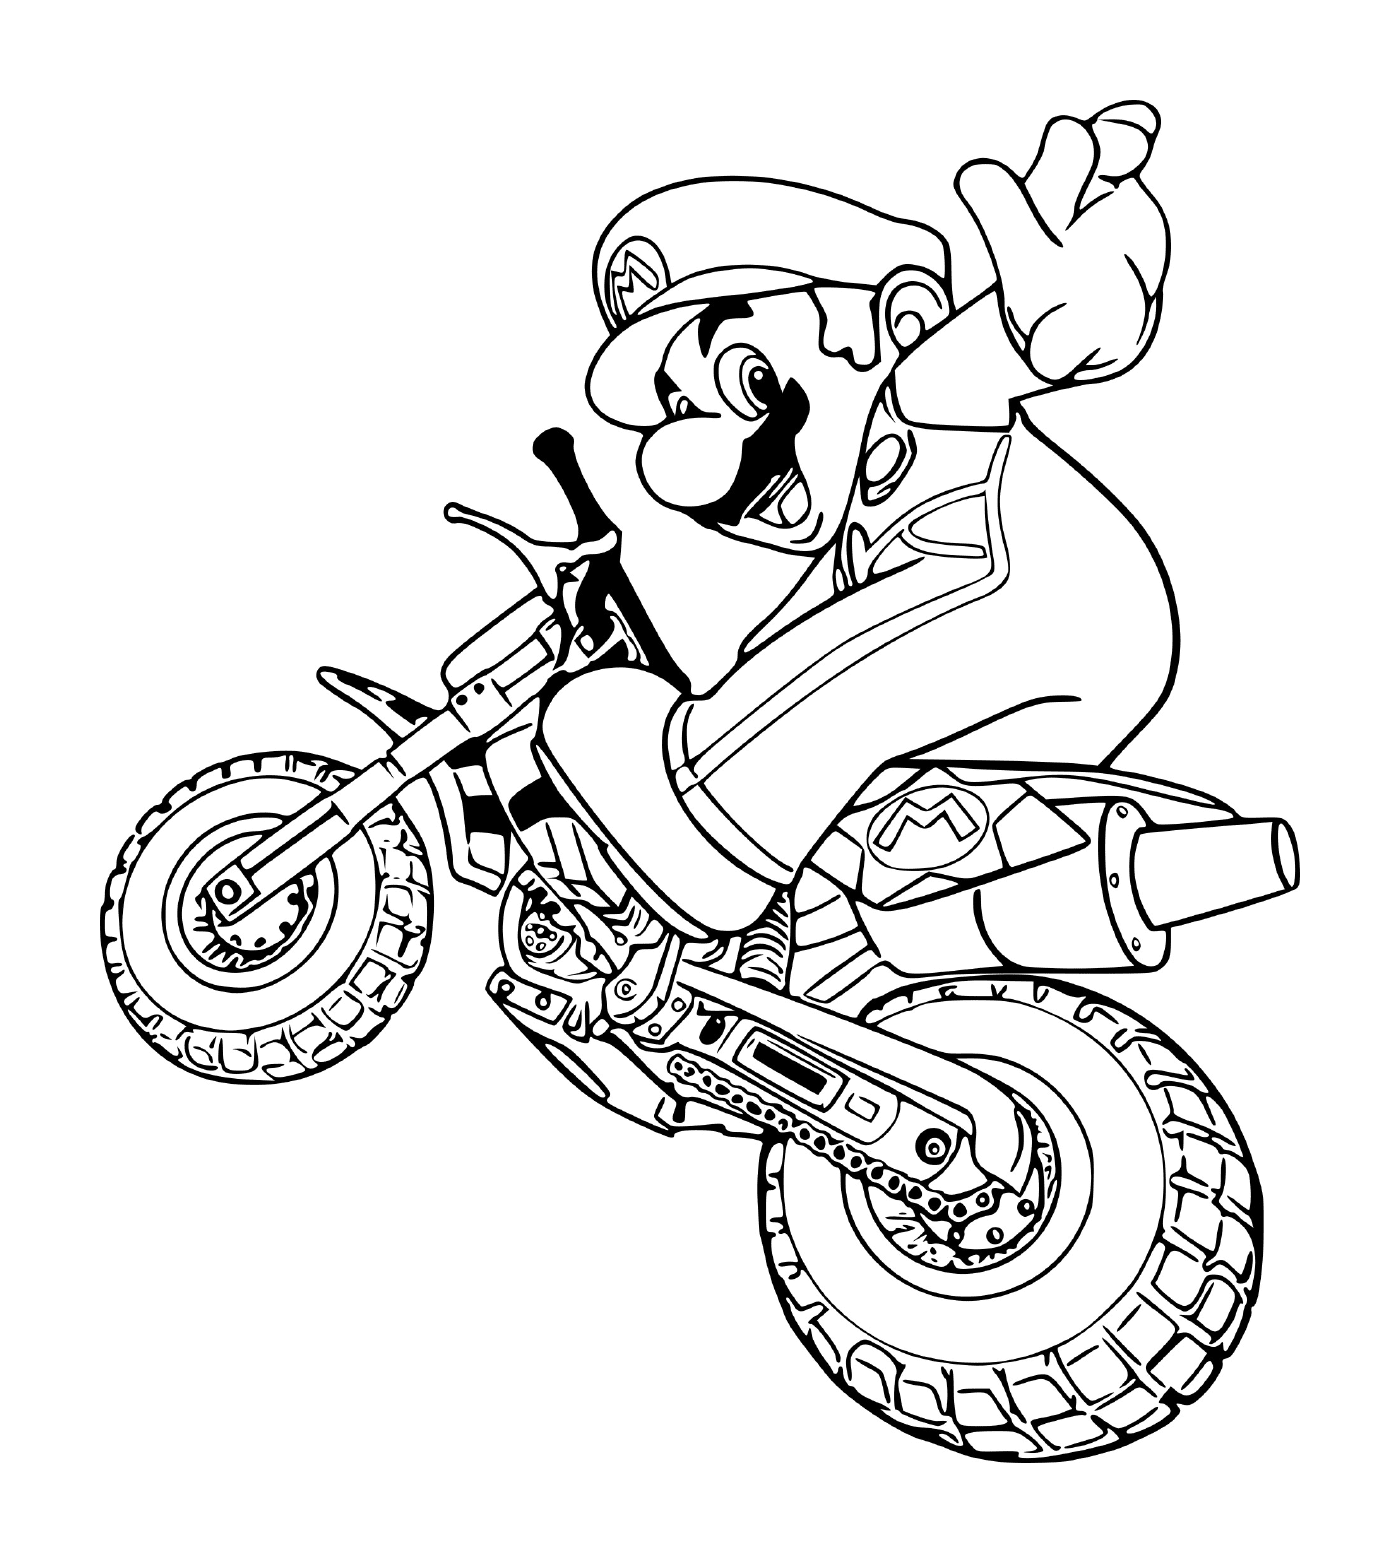  Mario on a motorcycle 